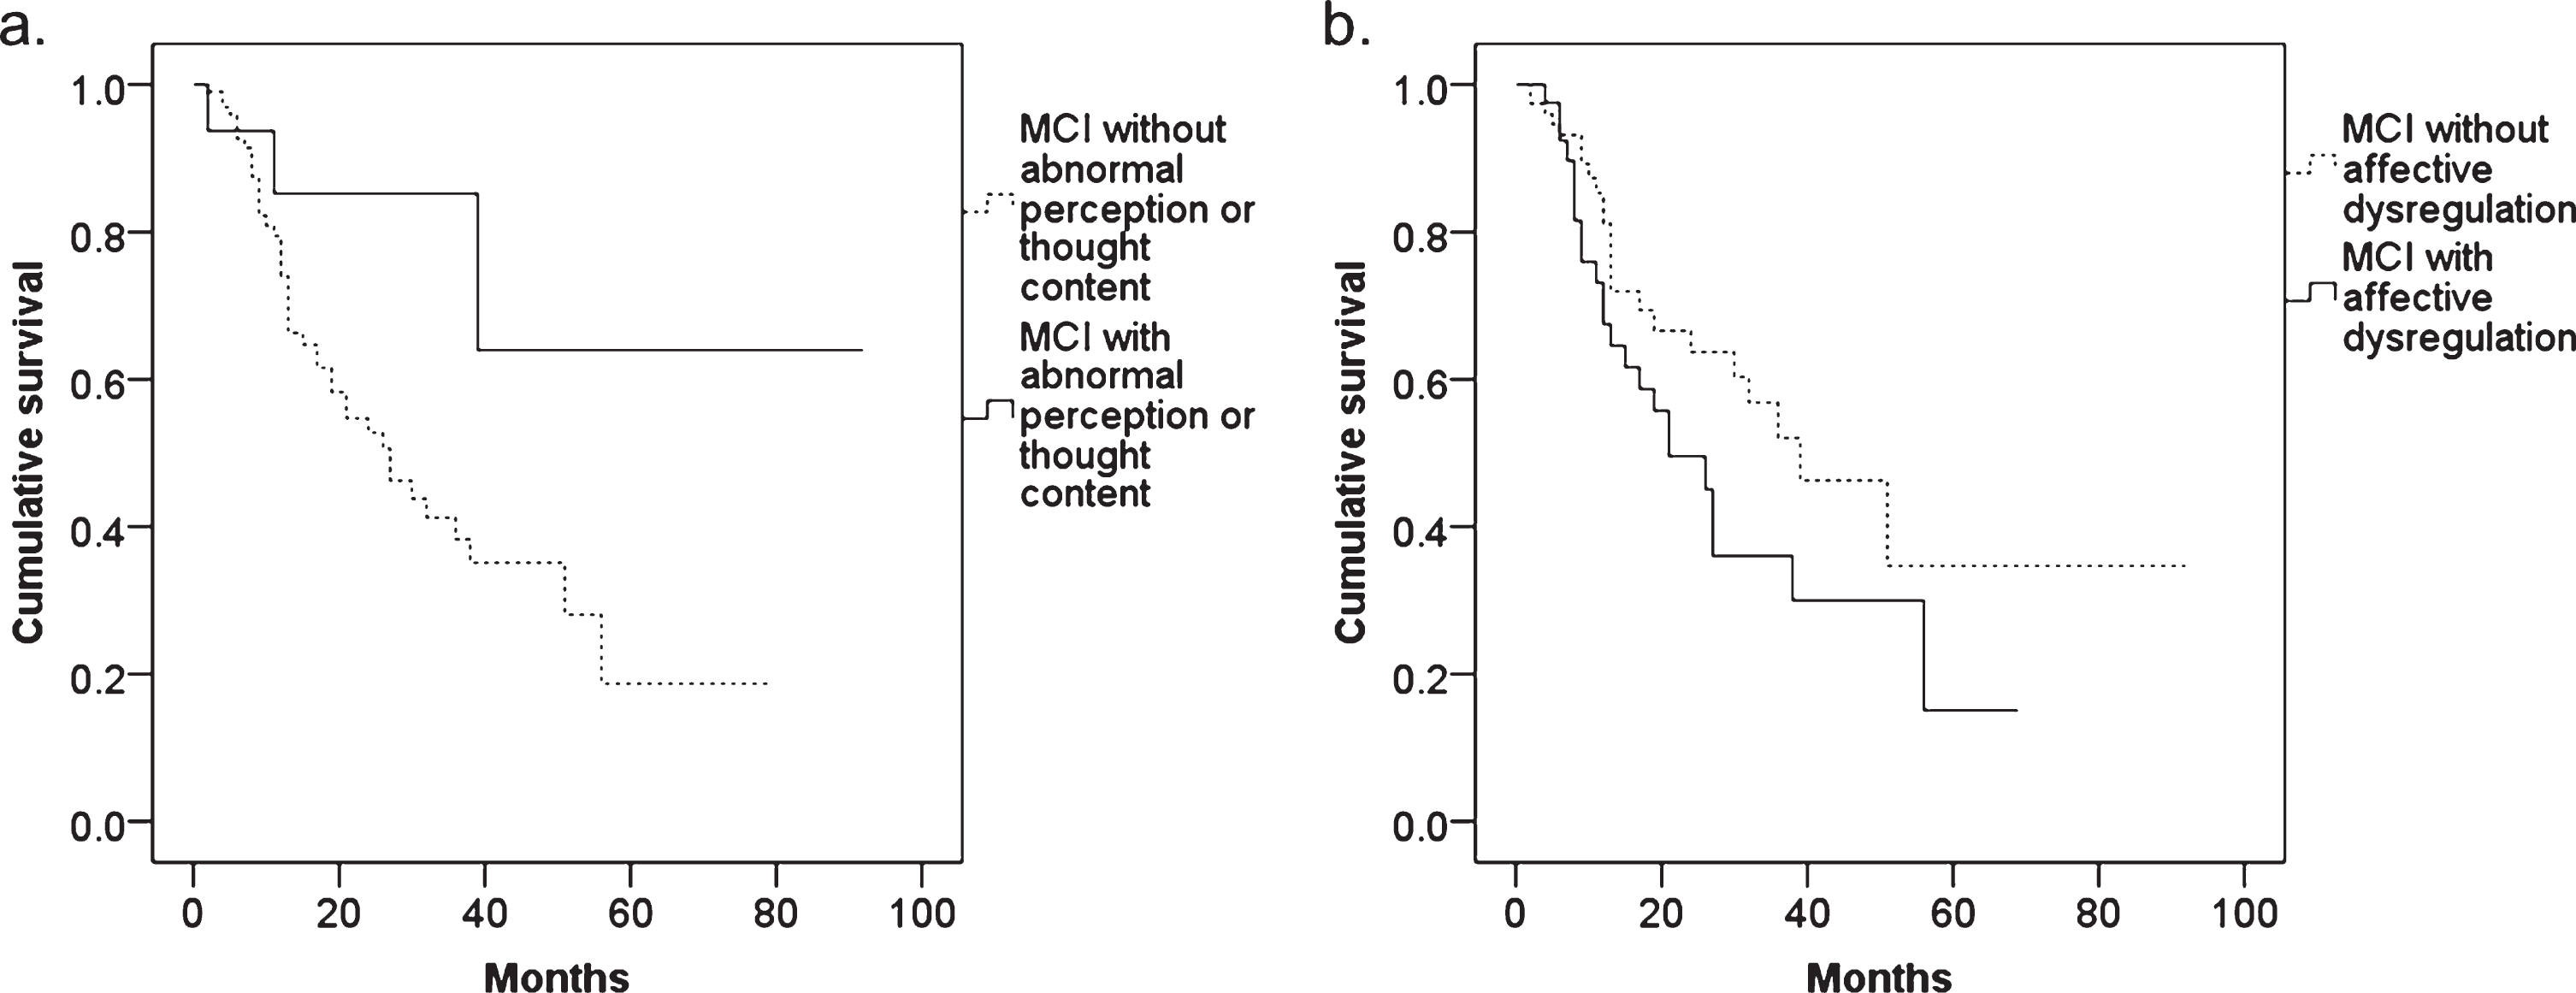 The results of Kaplan-Meier survival analysis in MCI patients with and without (a) abnormal perception or thought content and (b) affective dysregulation.